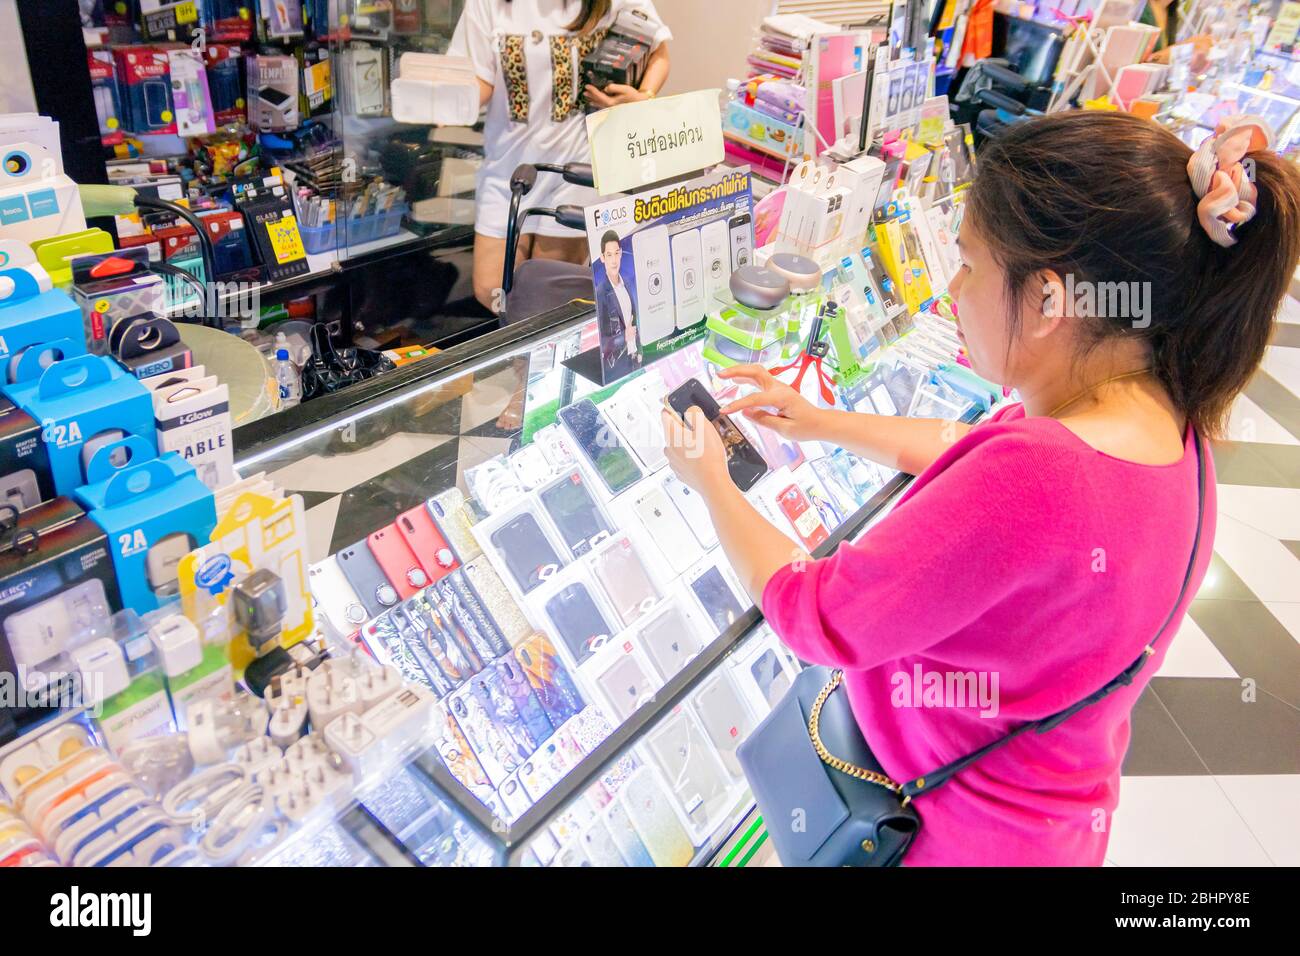 An Asian woman in pink shirt is waiting for changing her mobile phone protection film at the phone accessories shop in Village market in Huahin, Thail Stock Photo